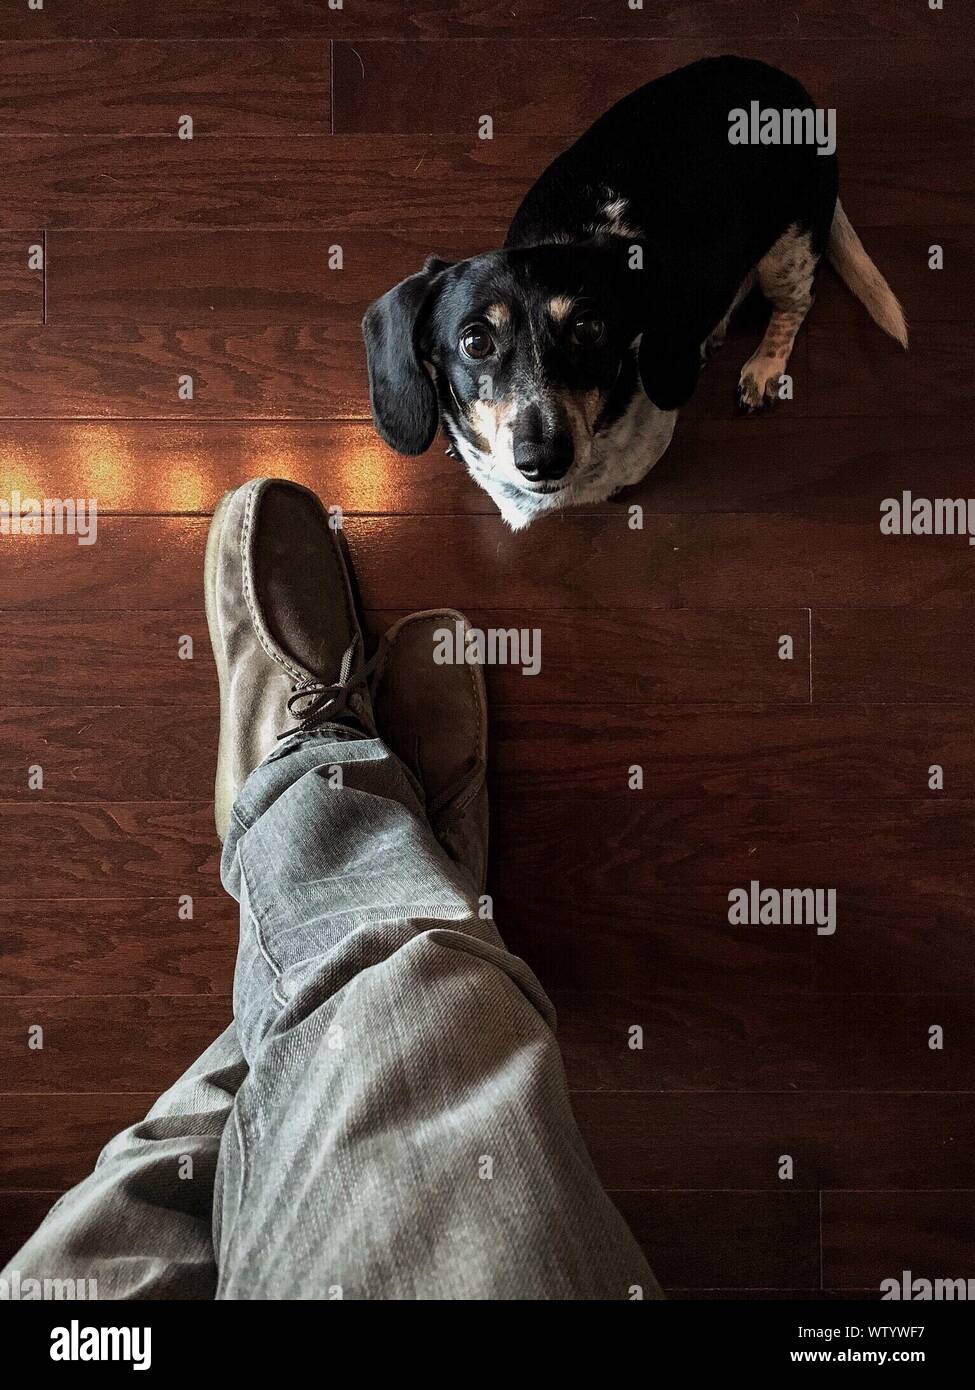 Low Section Of Man With Dog Standing On Hardwood Floor Stock Photo